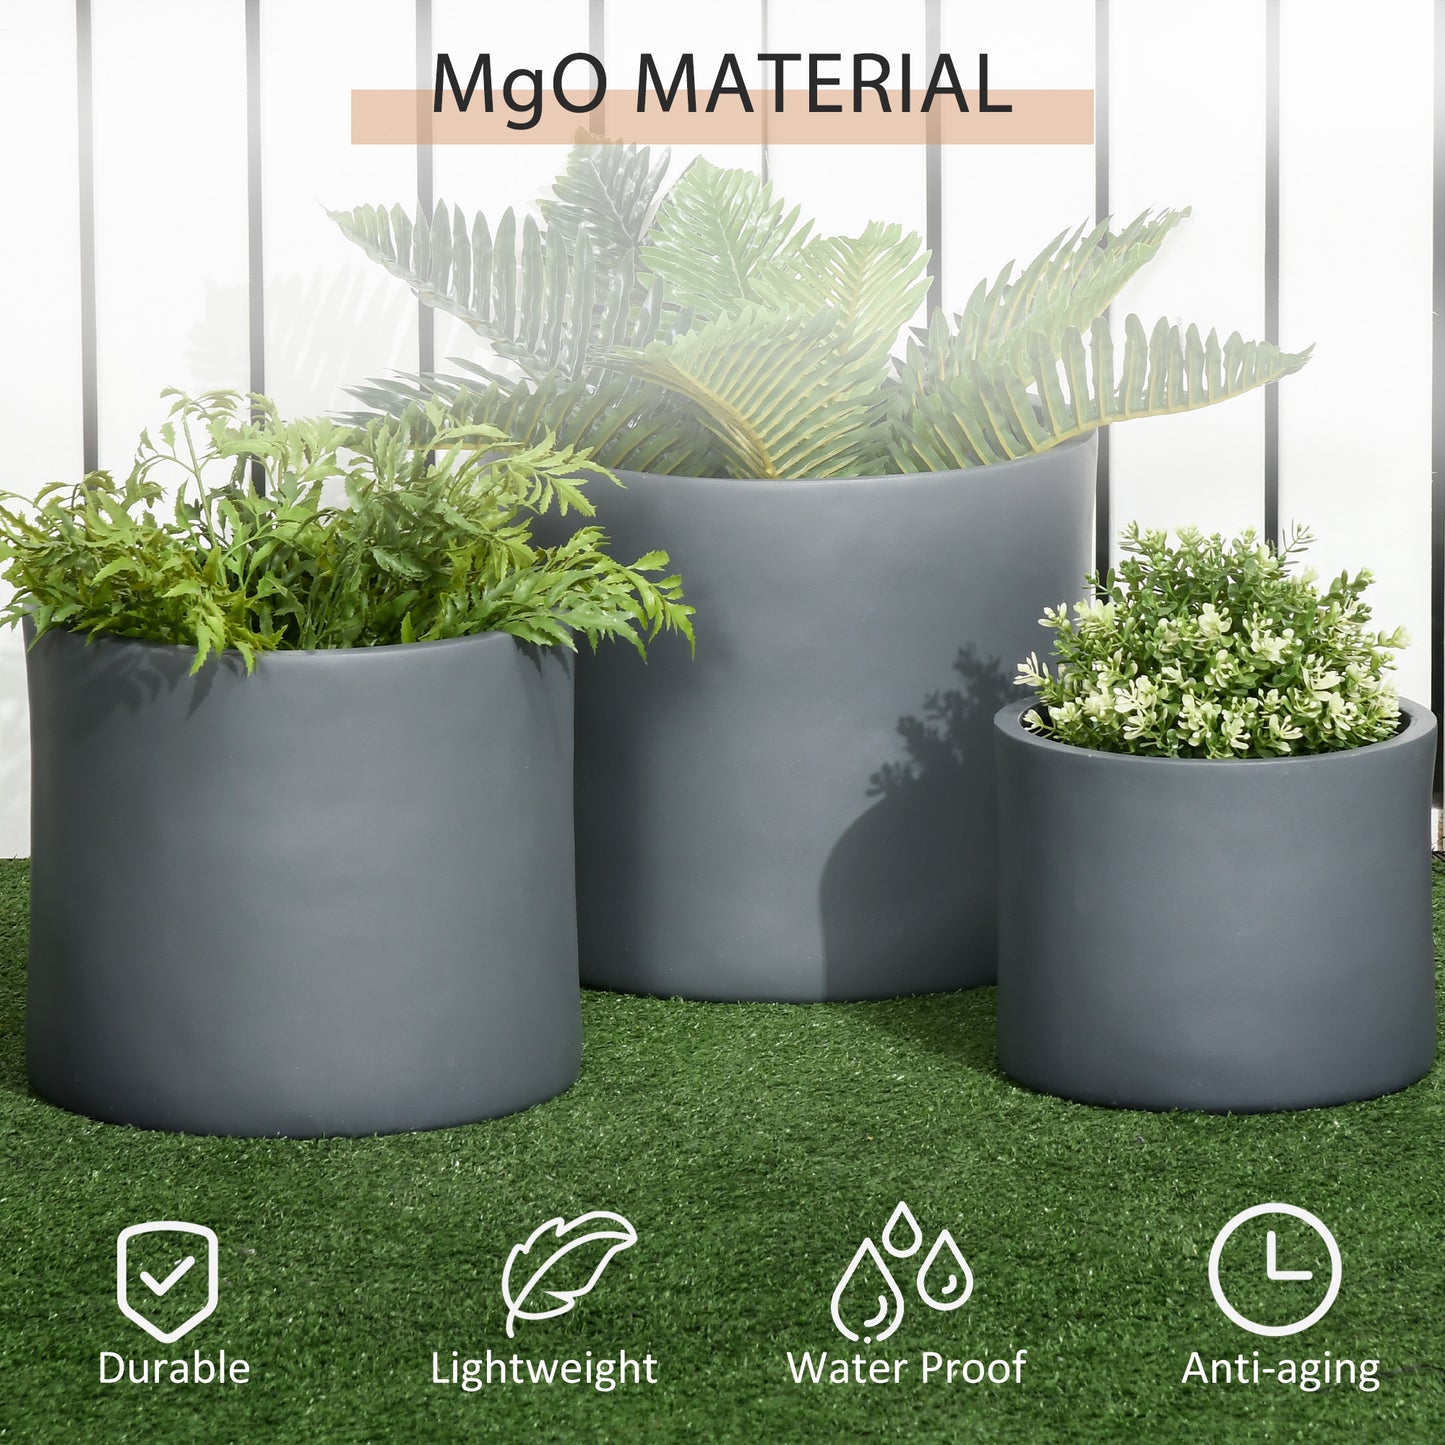 Set of 3 Outdoor Planter Set, 13/11.5/9in, Flower Pots with Drainage Holes, Outdoor Ready & Stackable Plant Pot for Indoor, Entryway, Patio, Yard, Garden